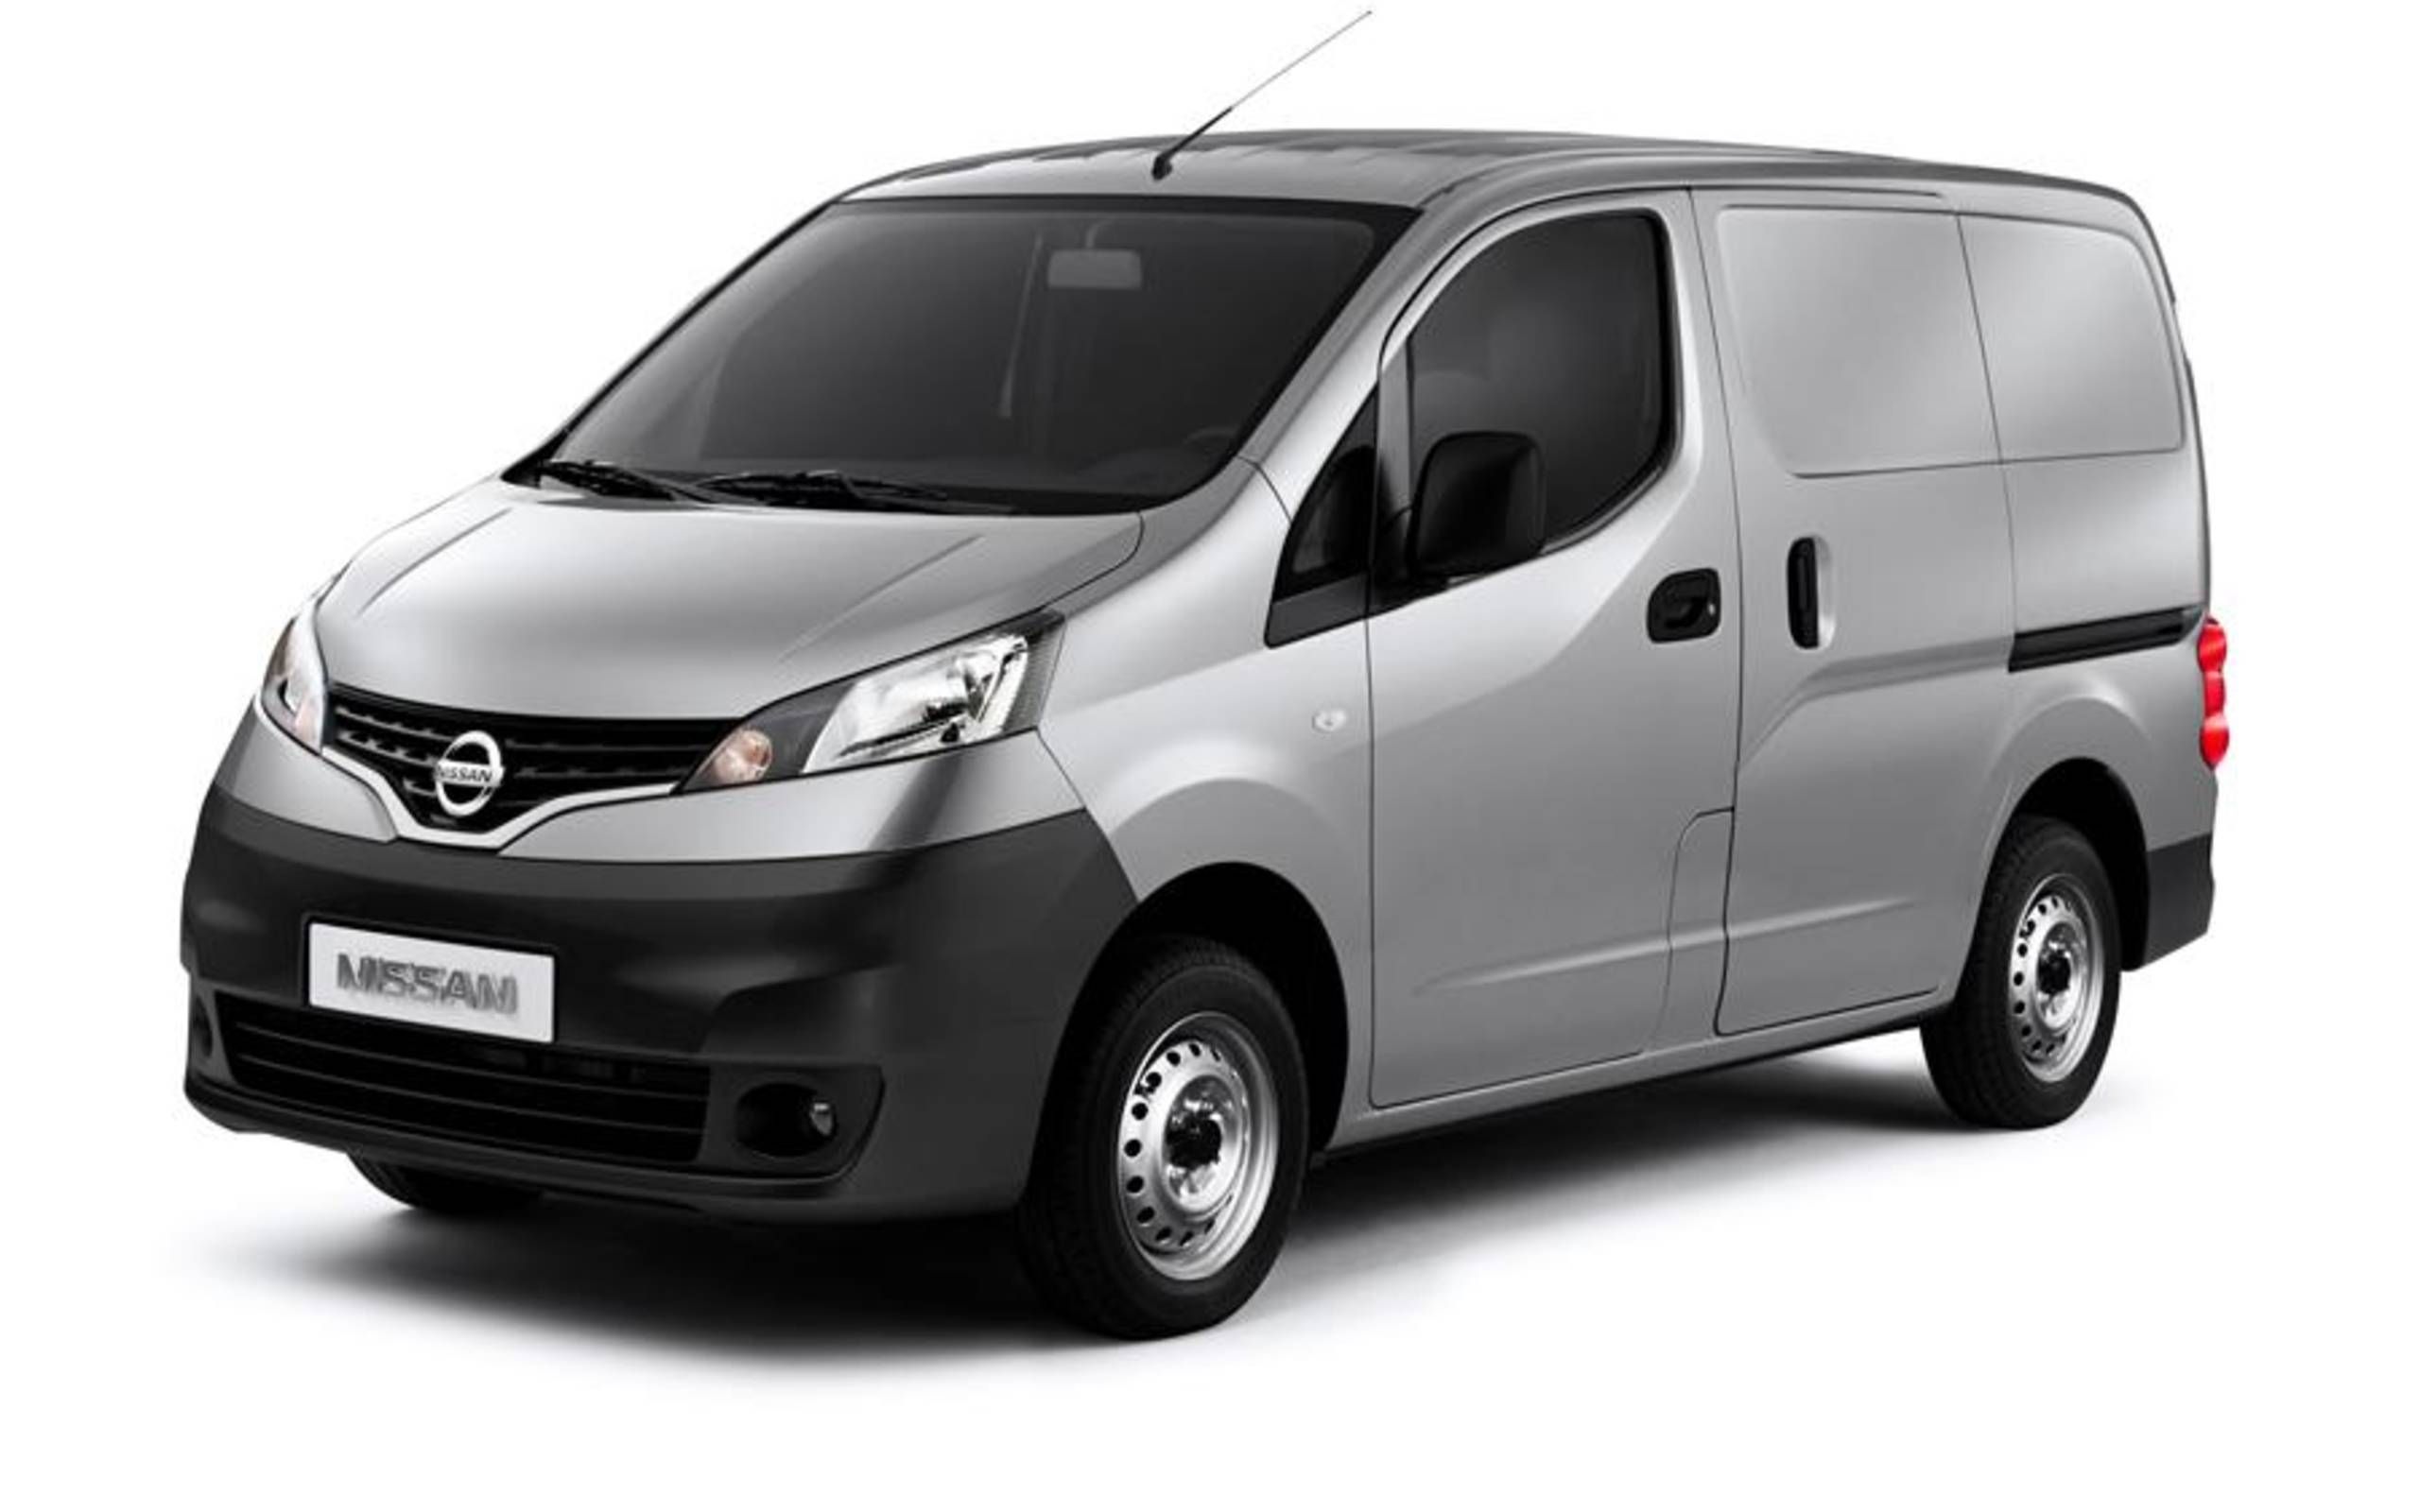 2013 Nissan NV200 Compact Cargo SV review notes